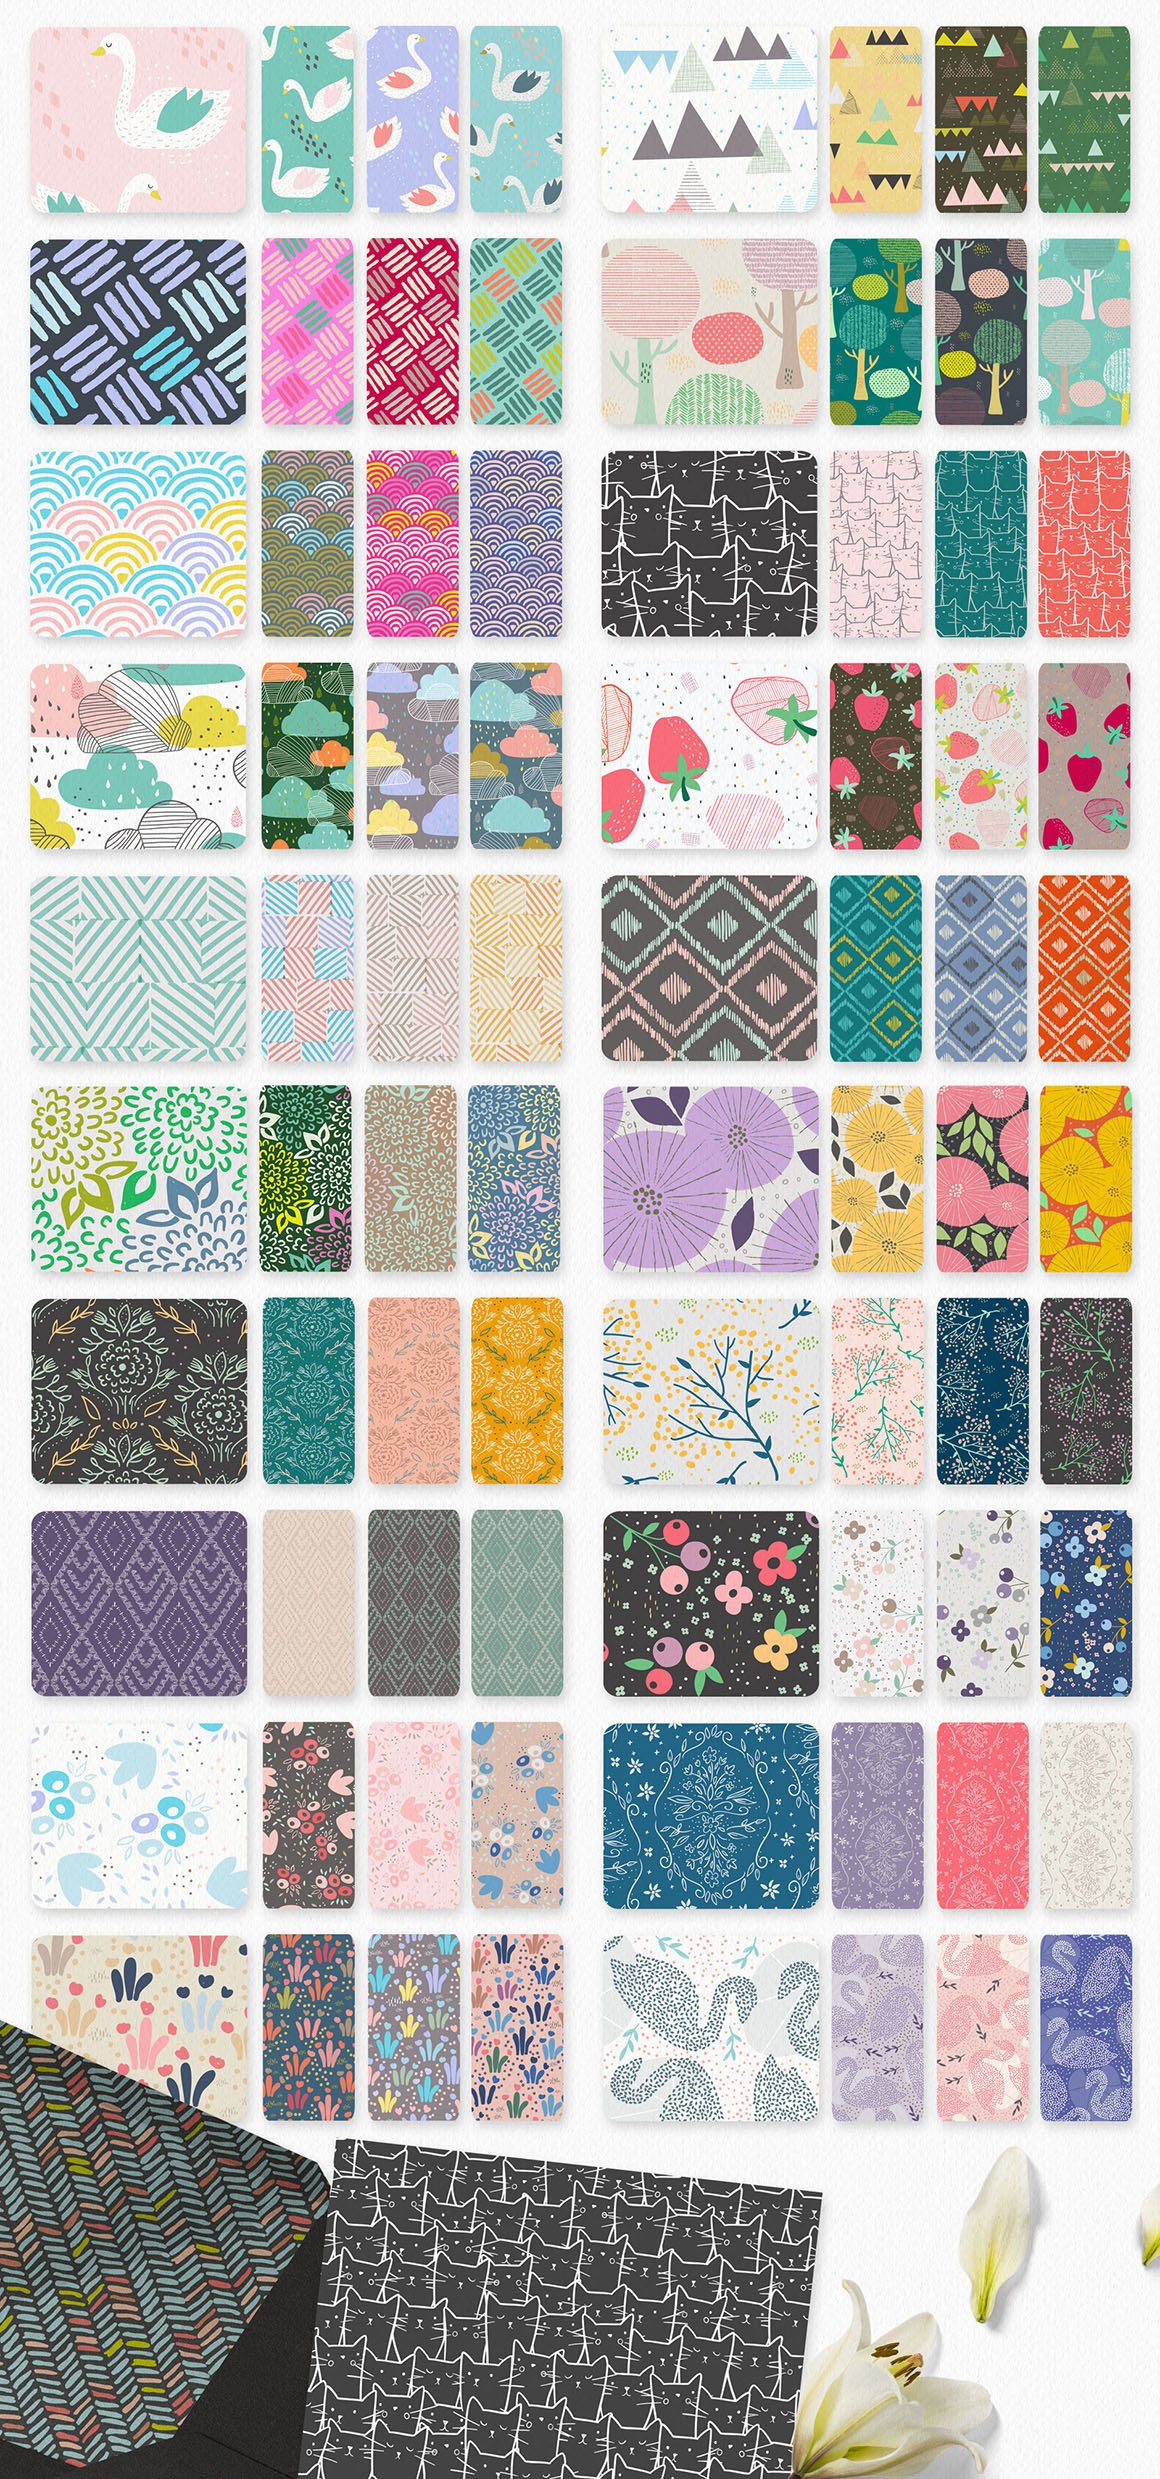 Et Cetera Pattern Collections